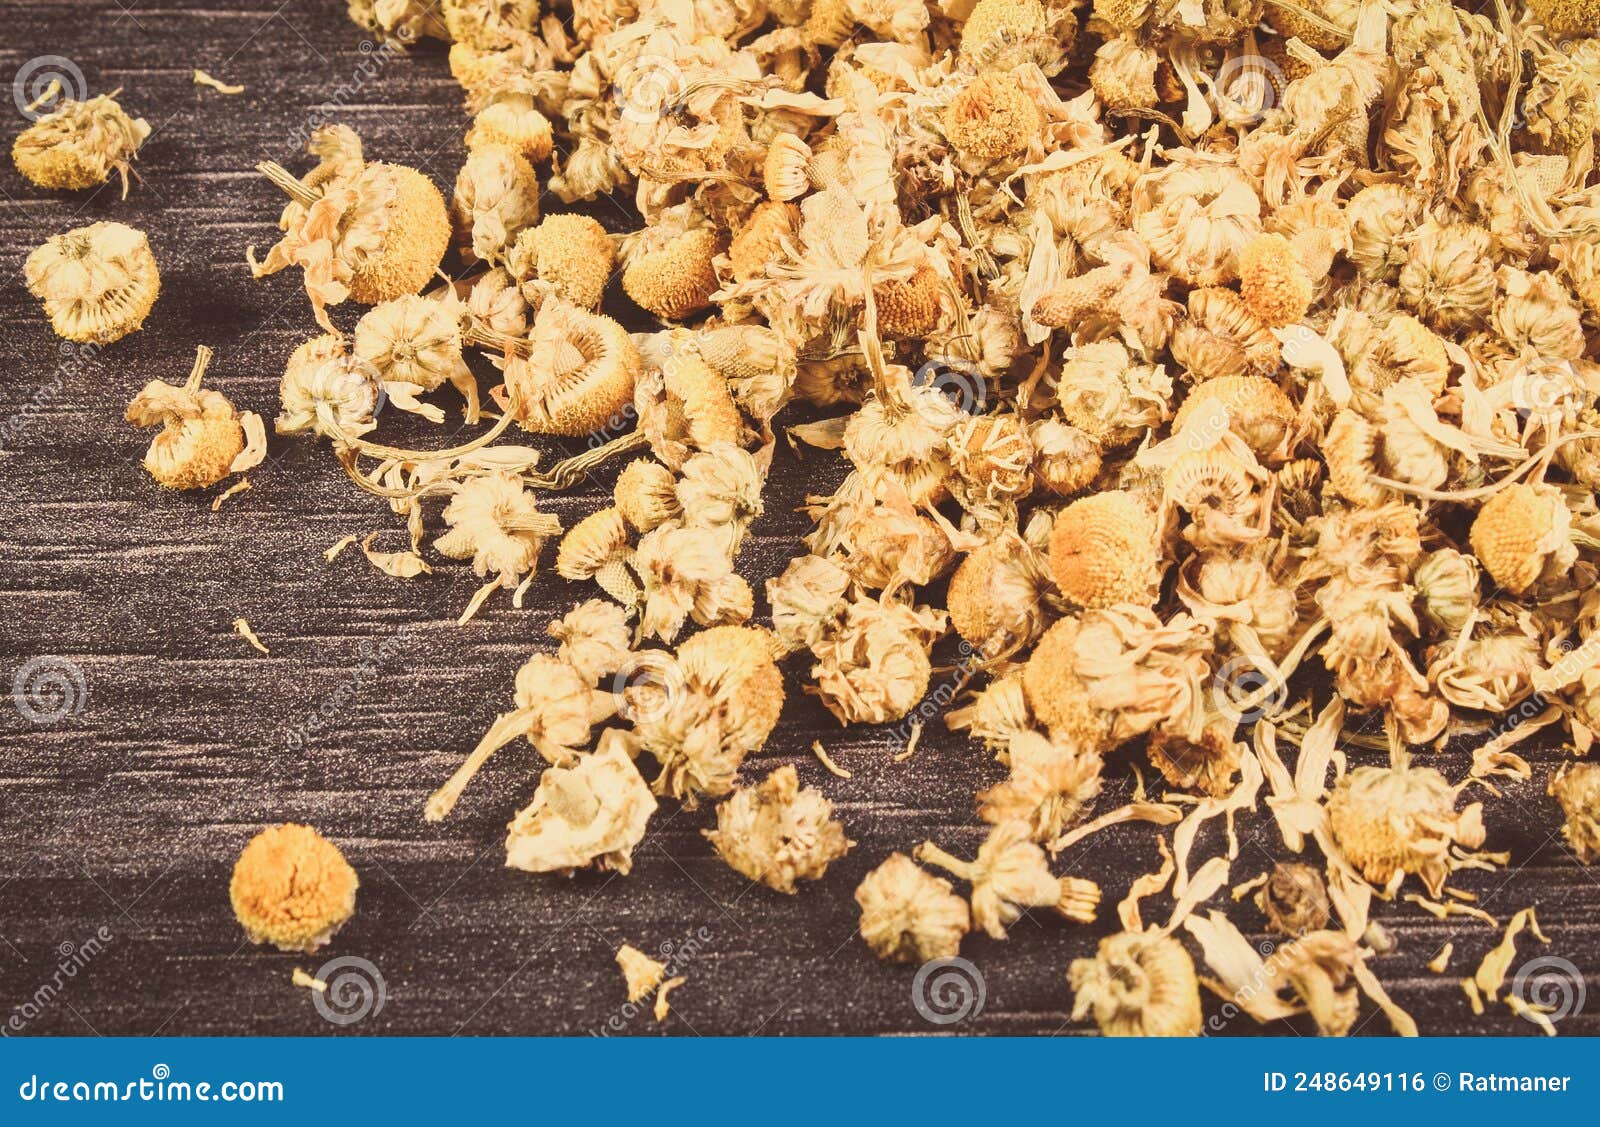 dried chamomile on wooden board. alternative medicine and herbalism